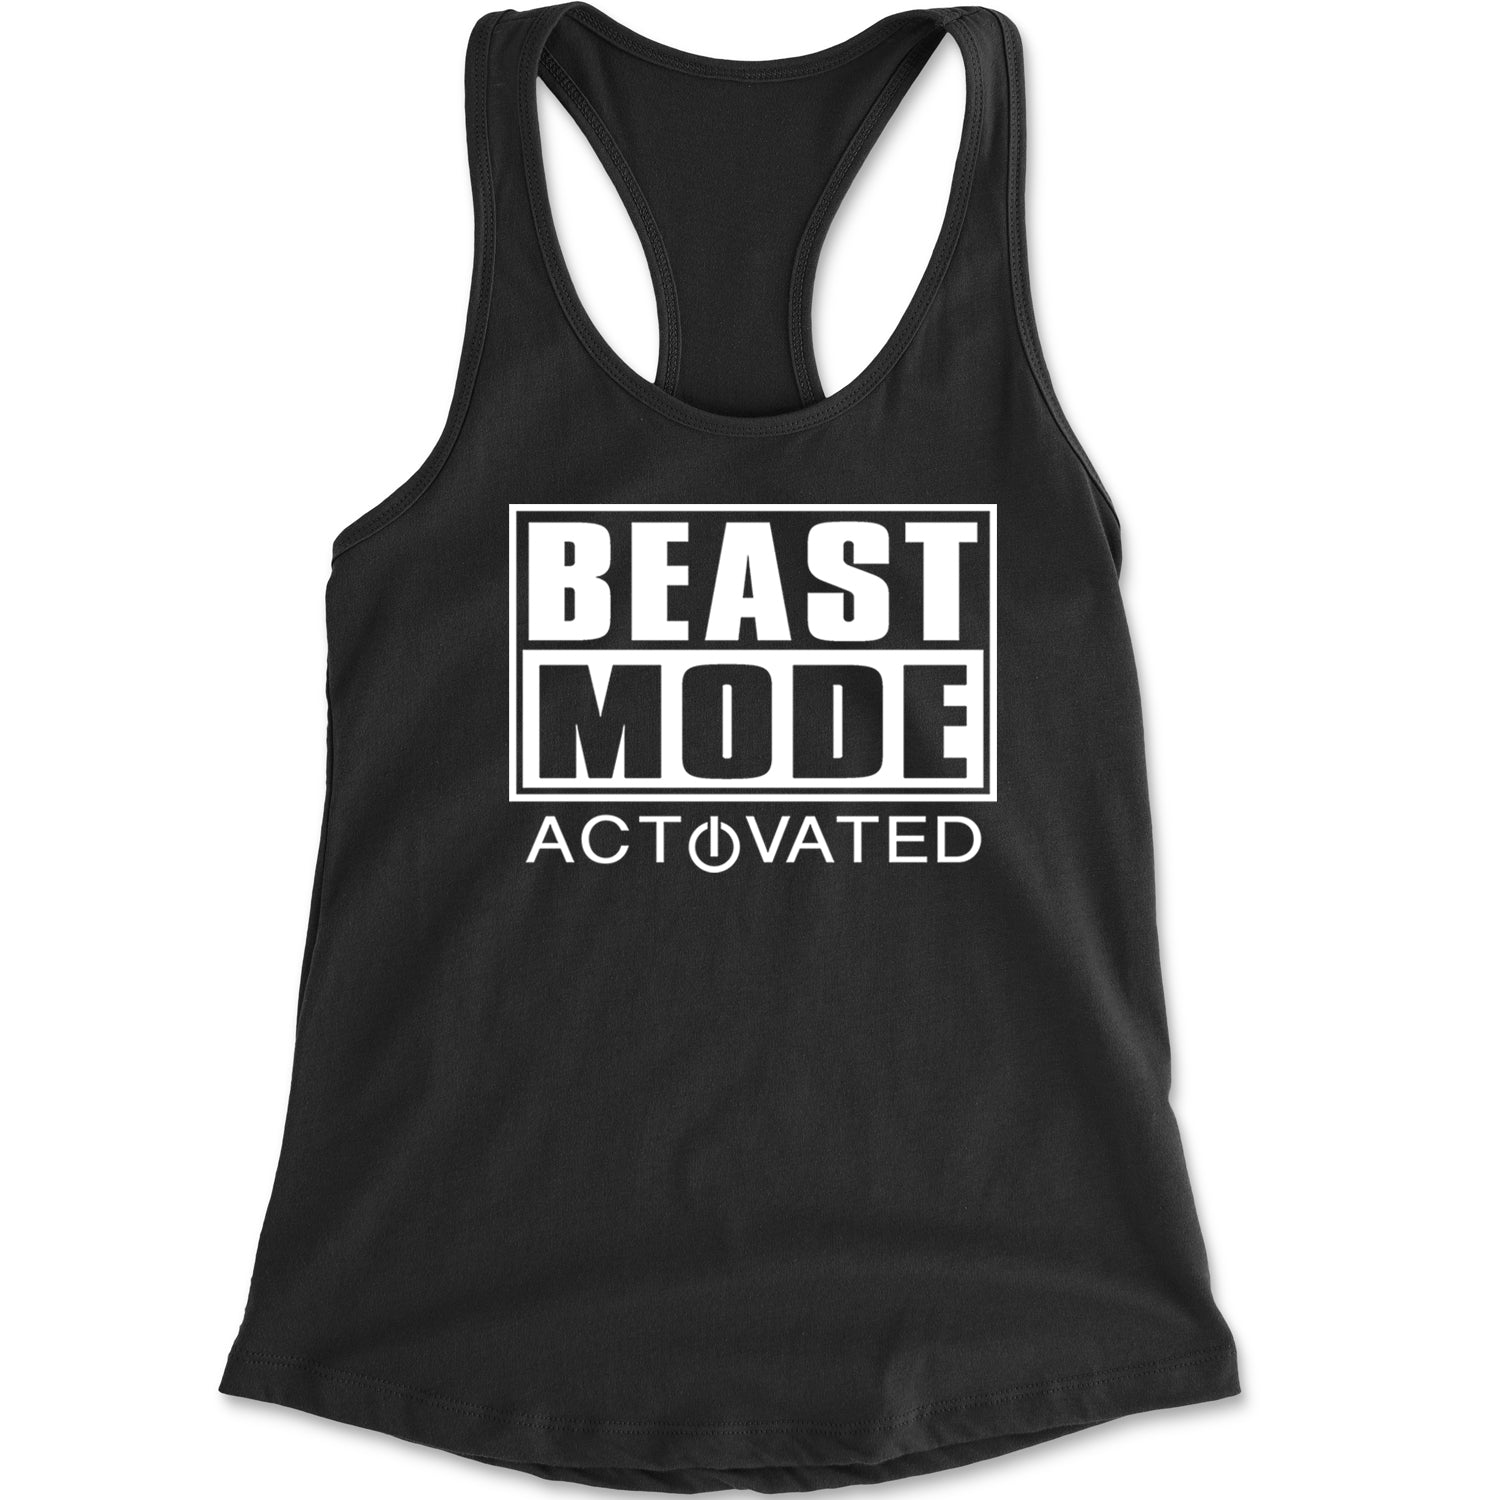 Activated Beast Mode Workout Gym Clothing Racerback Tank Top for Women